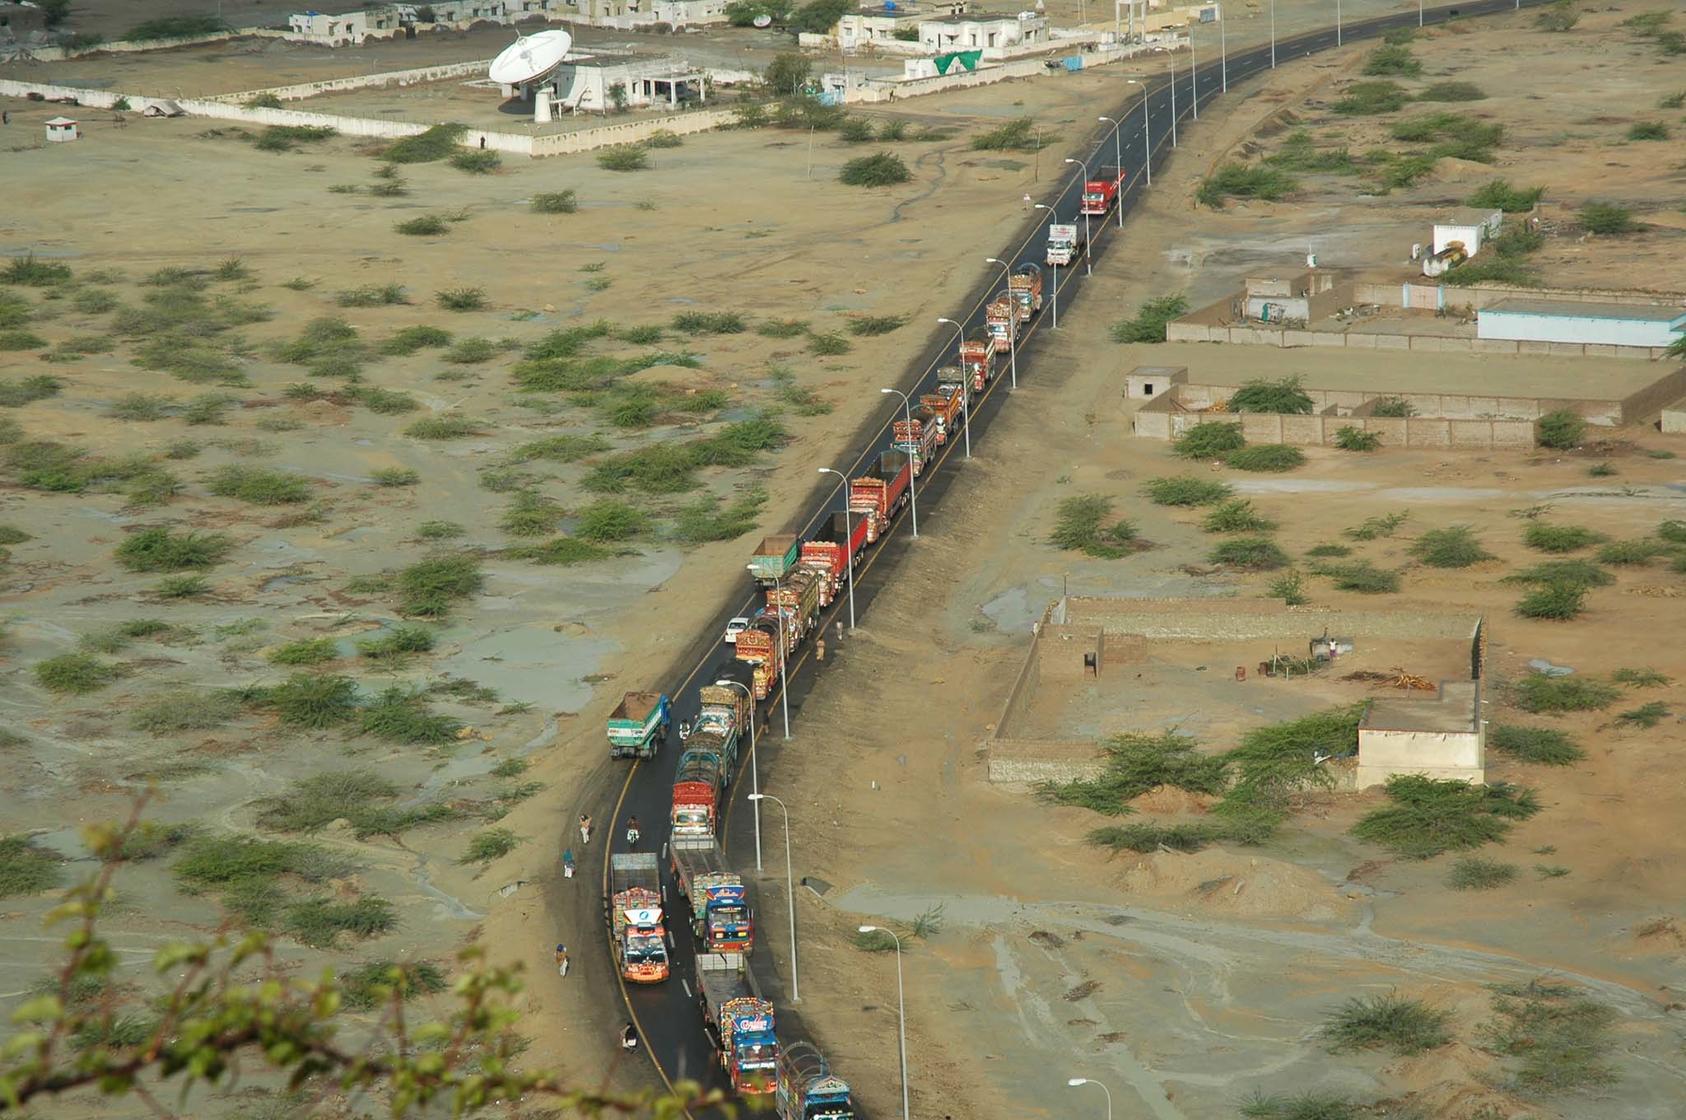 Traffic at the Gwadar Port in Pakistan, where CPEC first became operational when the first overland convoy from China arrived on Nov. 13, 2016. (CC License 4.0/Sadiqrizwan)